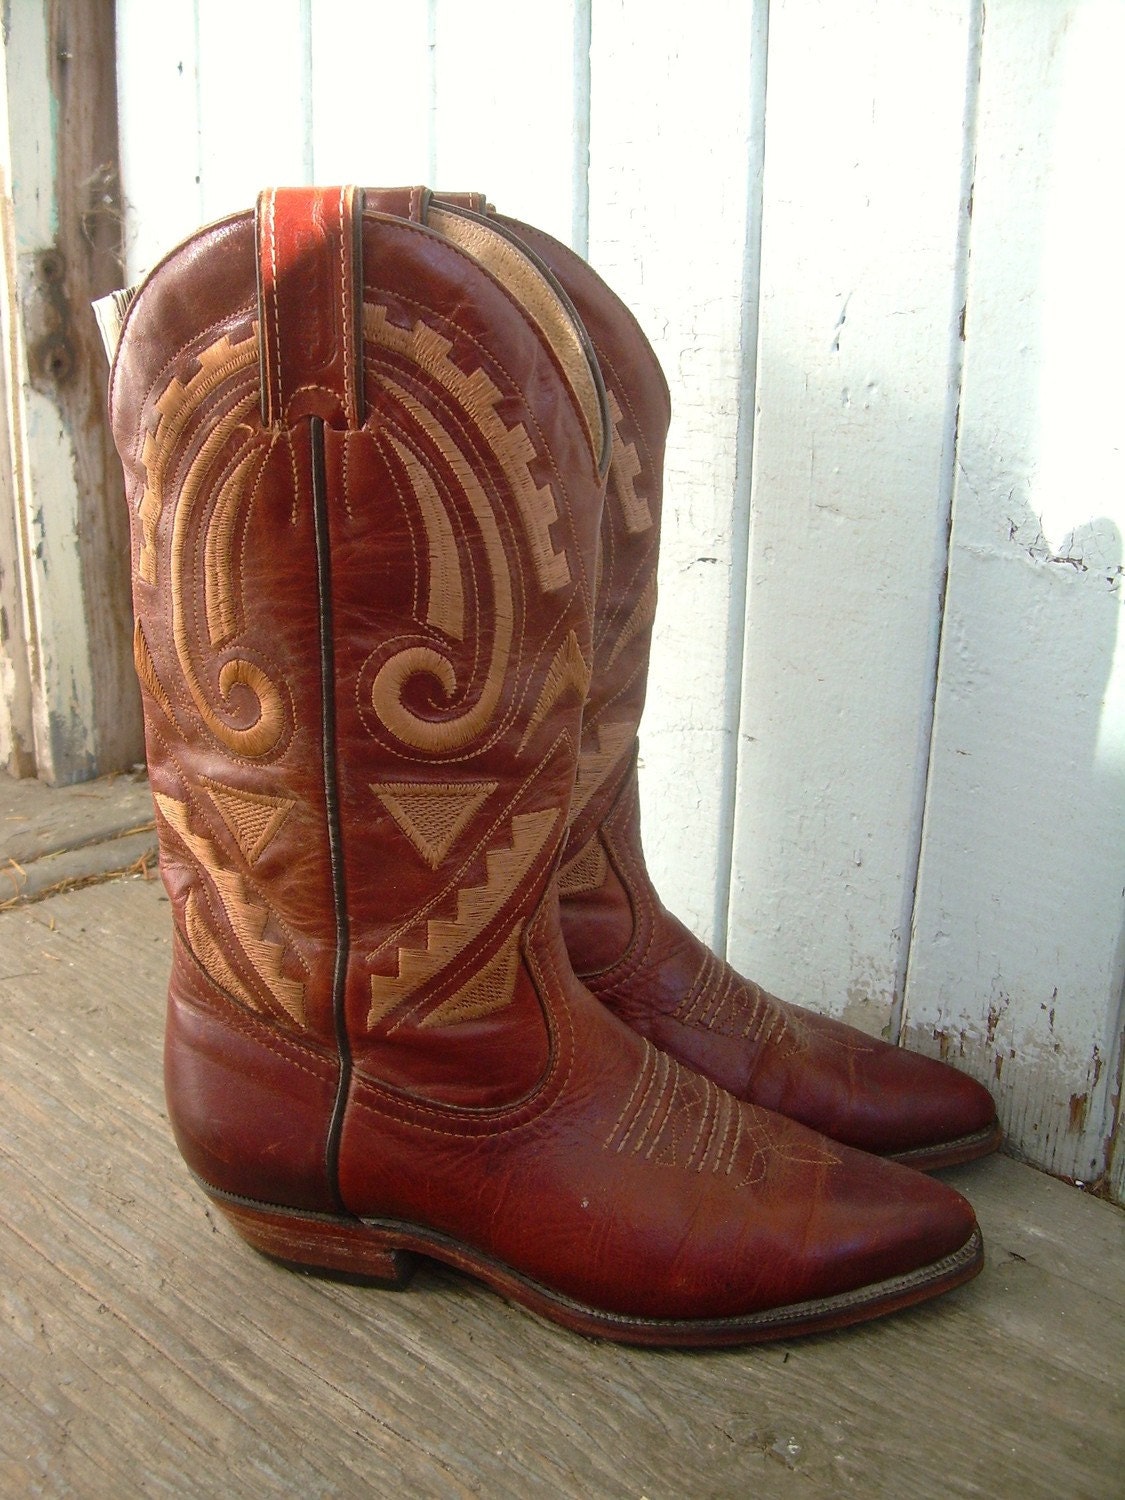 VINTAGE WOMEN'S BROWN LEATHER SOUTHWESTERN COWBOY BOOTS SZE 6 BY BOOTMEISTER